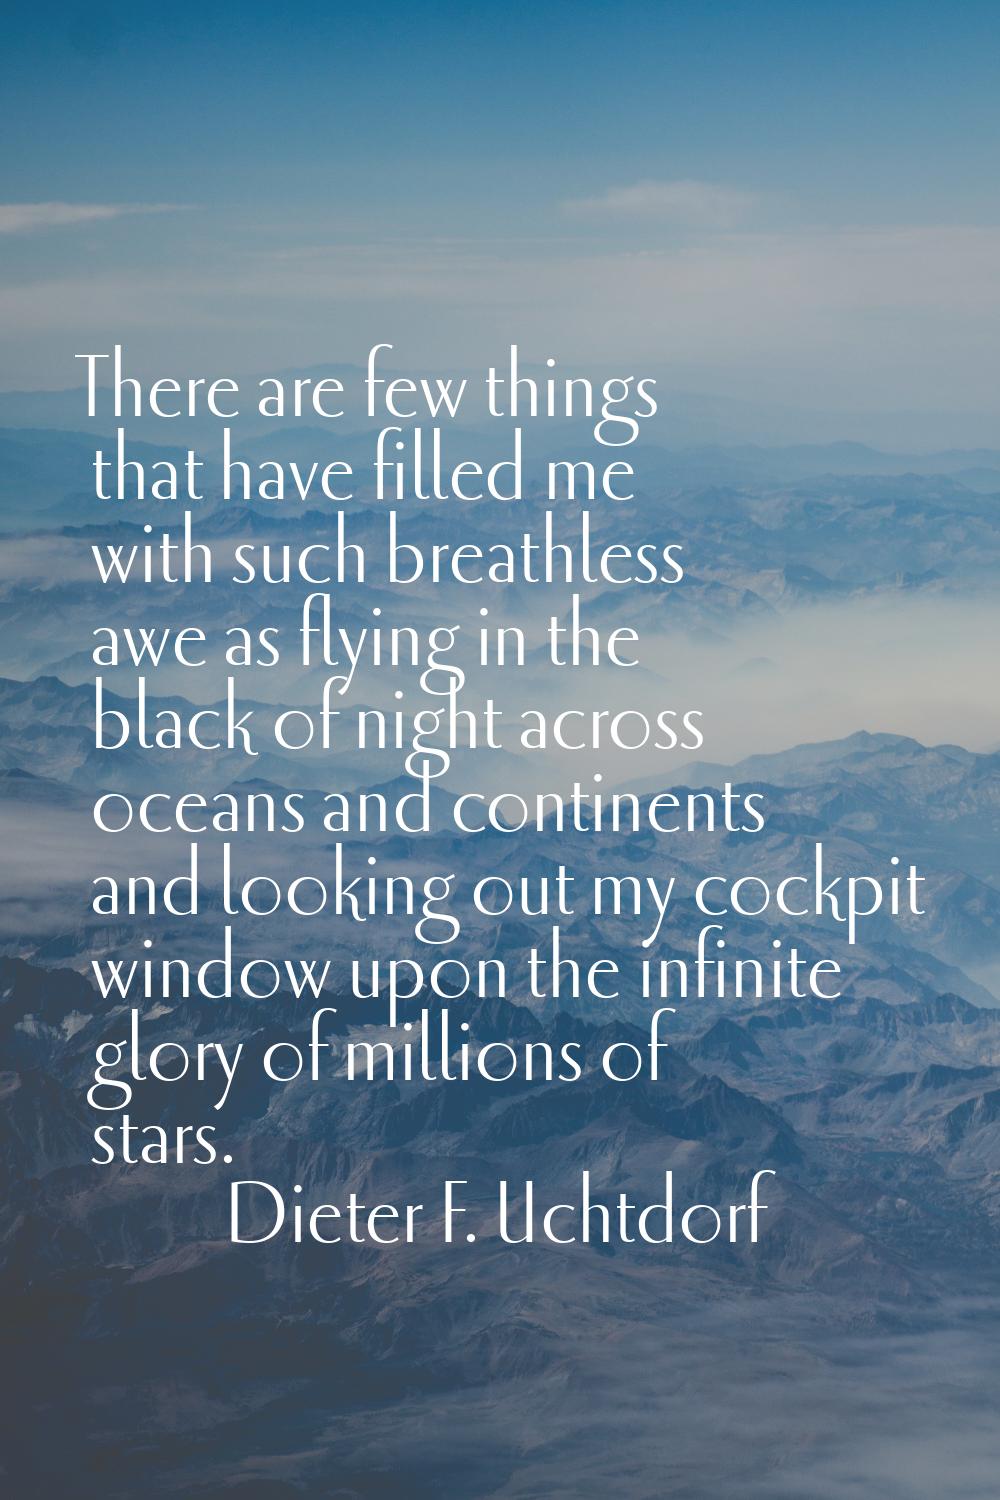 There are few things that have filled me with such breathless awe as flying in the black of night a